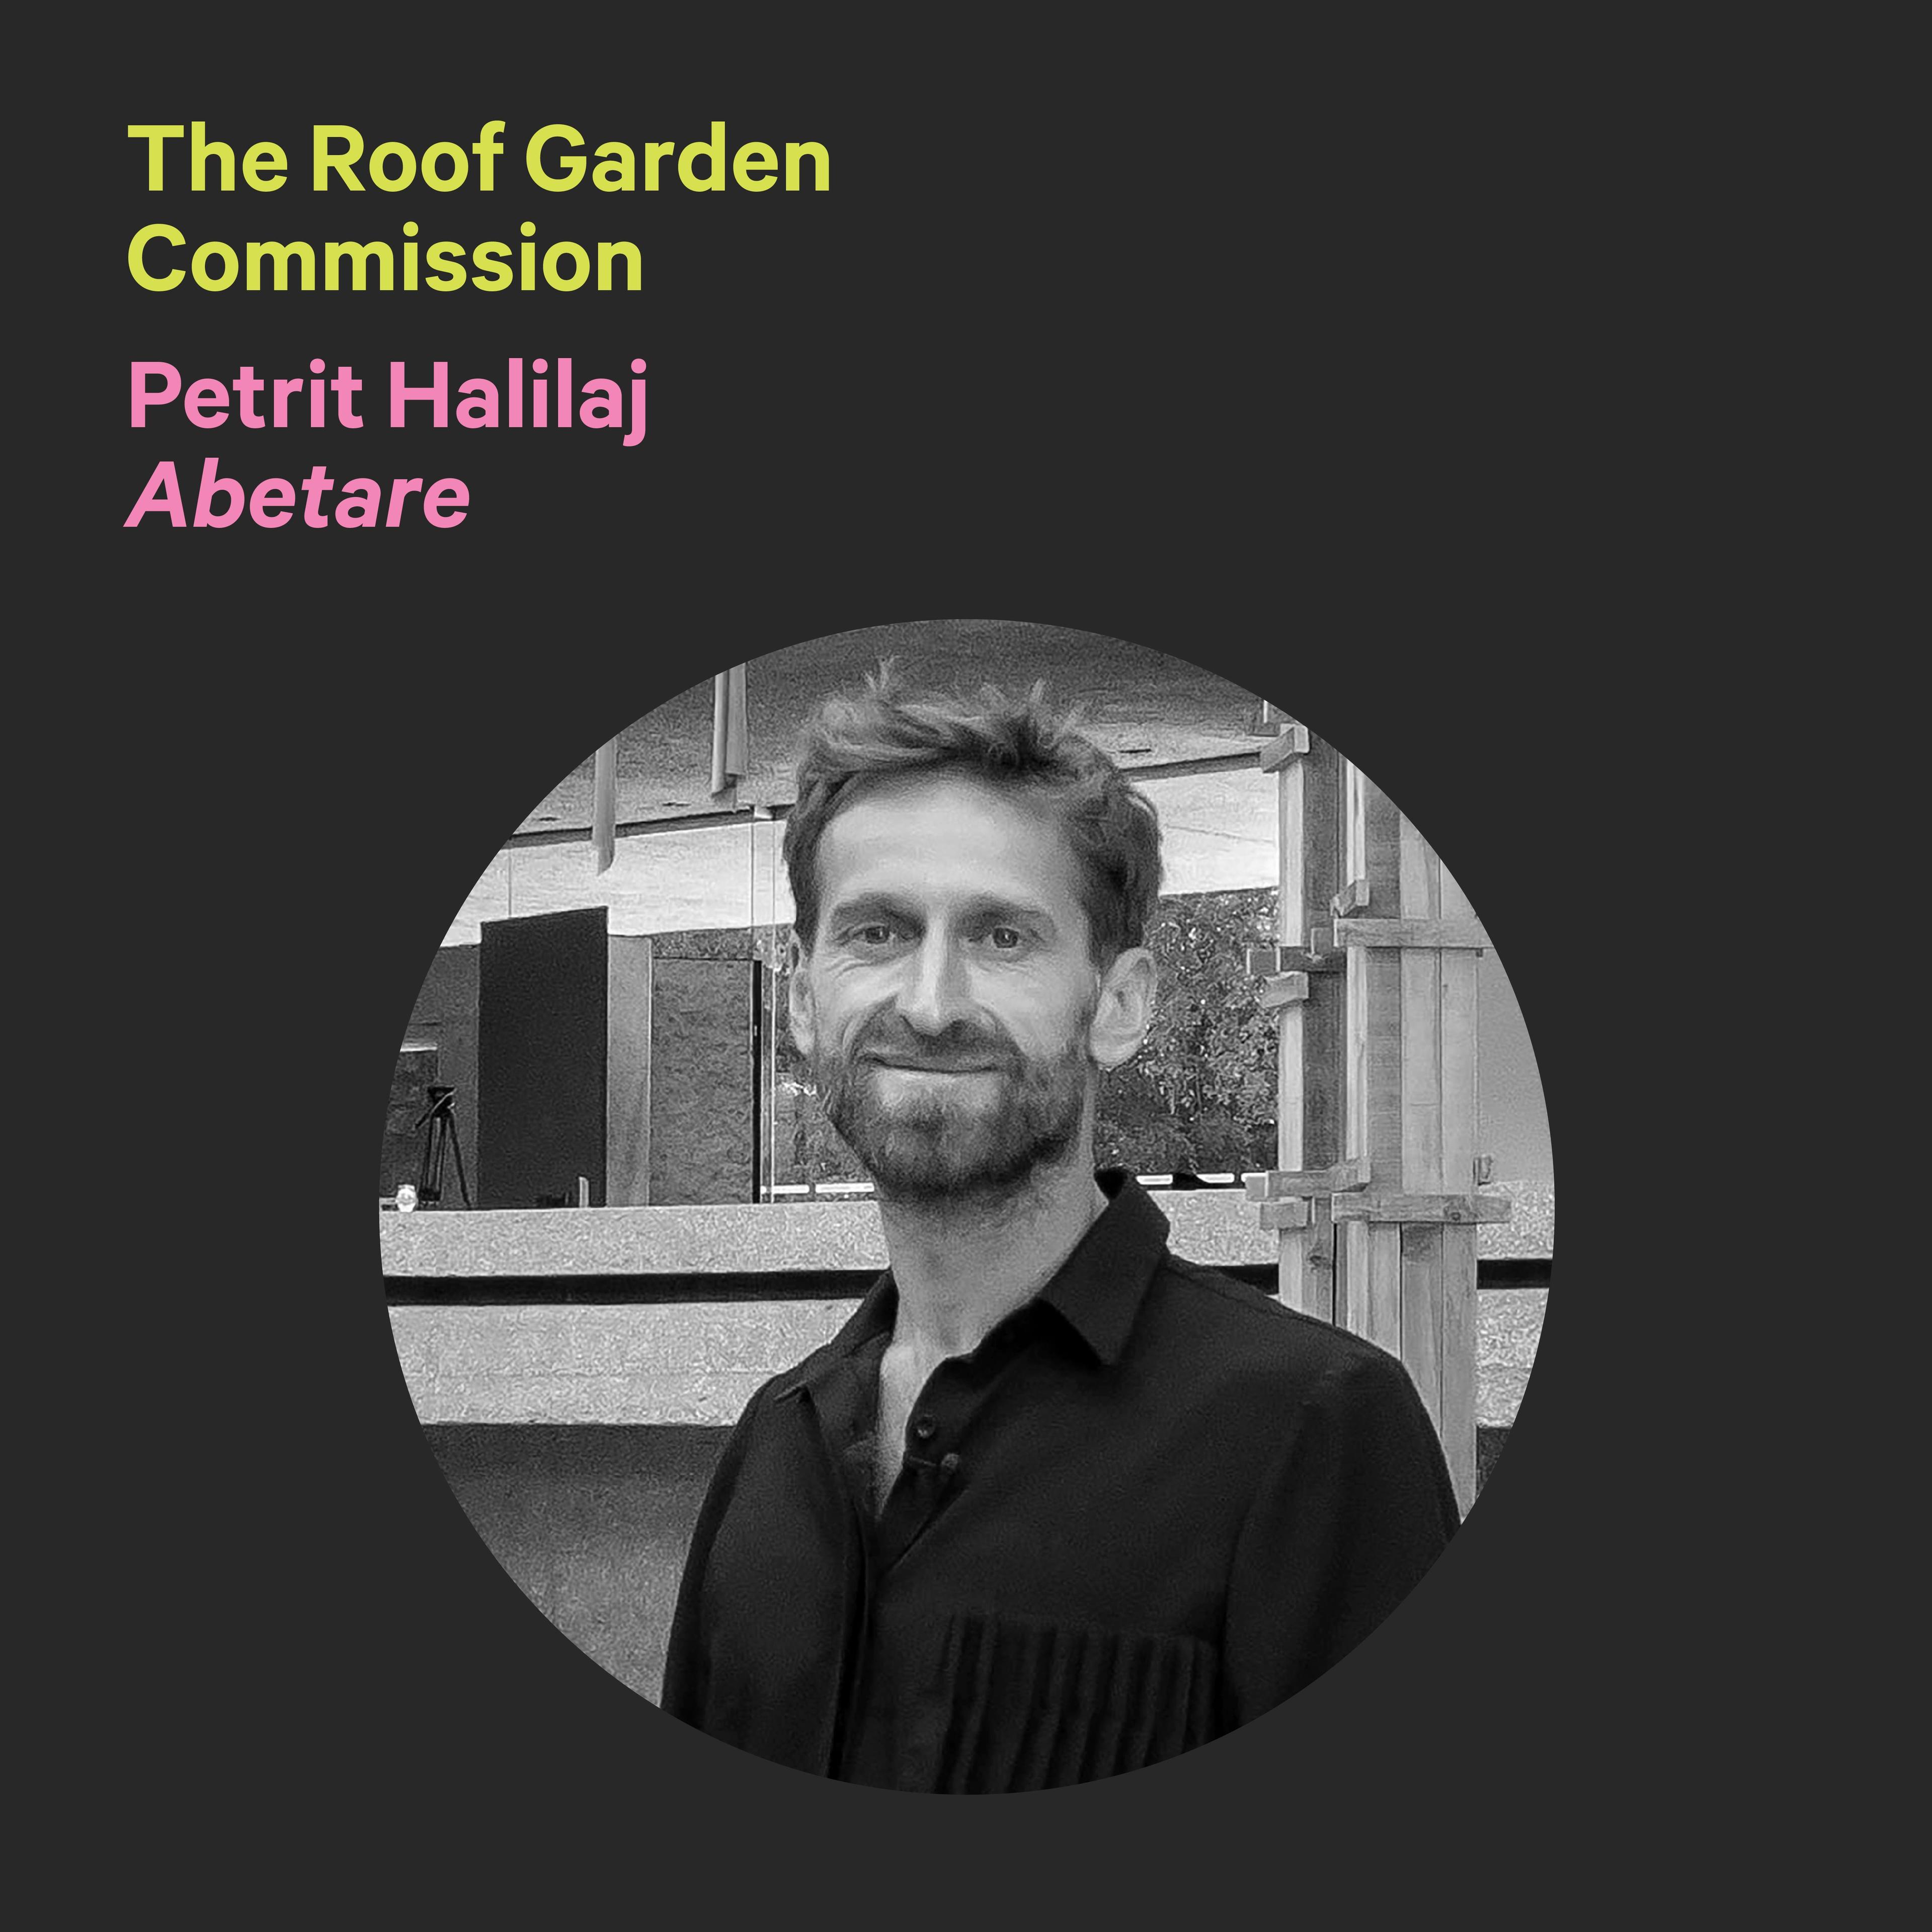 Blue text box that reads "The Roof Garden Commission" with the artist name, Petrit Halilaj